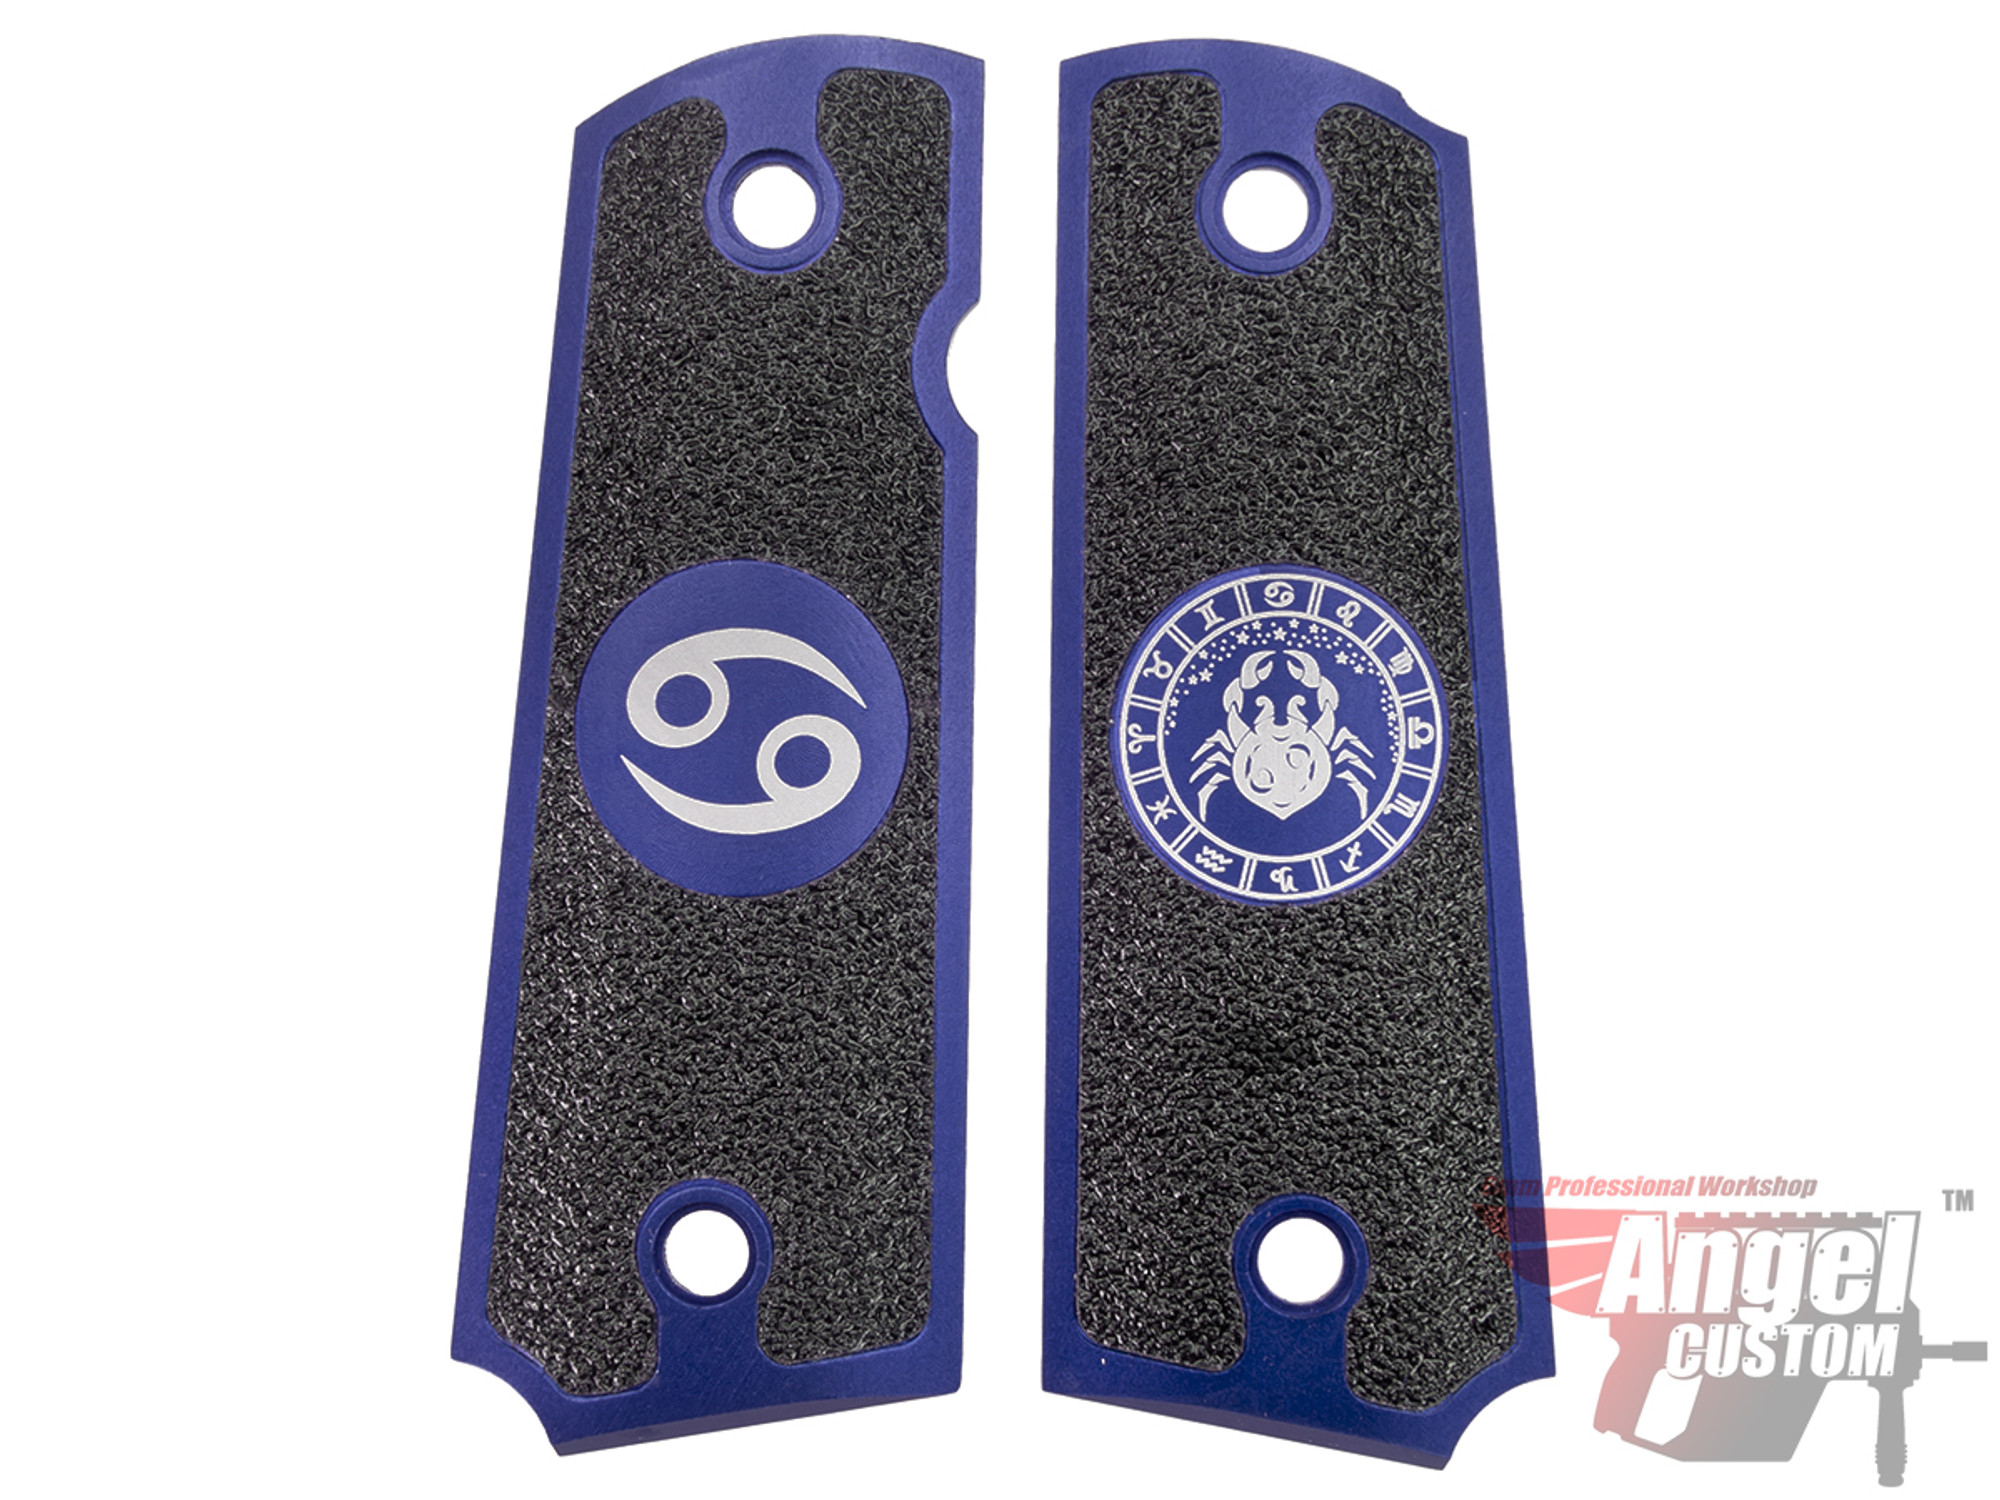 Angel Custom CNC Machined Tac-Glove "Zodiac" Grips for WE-Tech 1911 Series Airsoft Pistols - Navy Blue (Sign: Cancer)